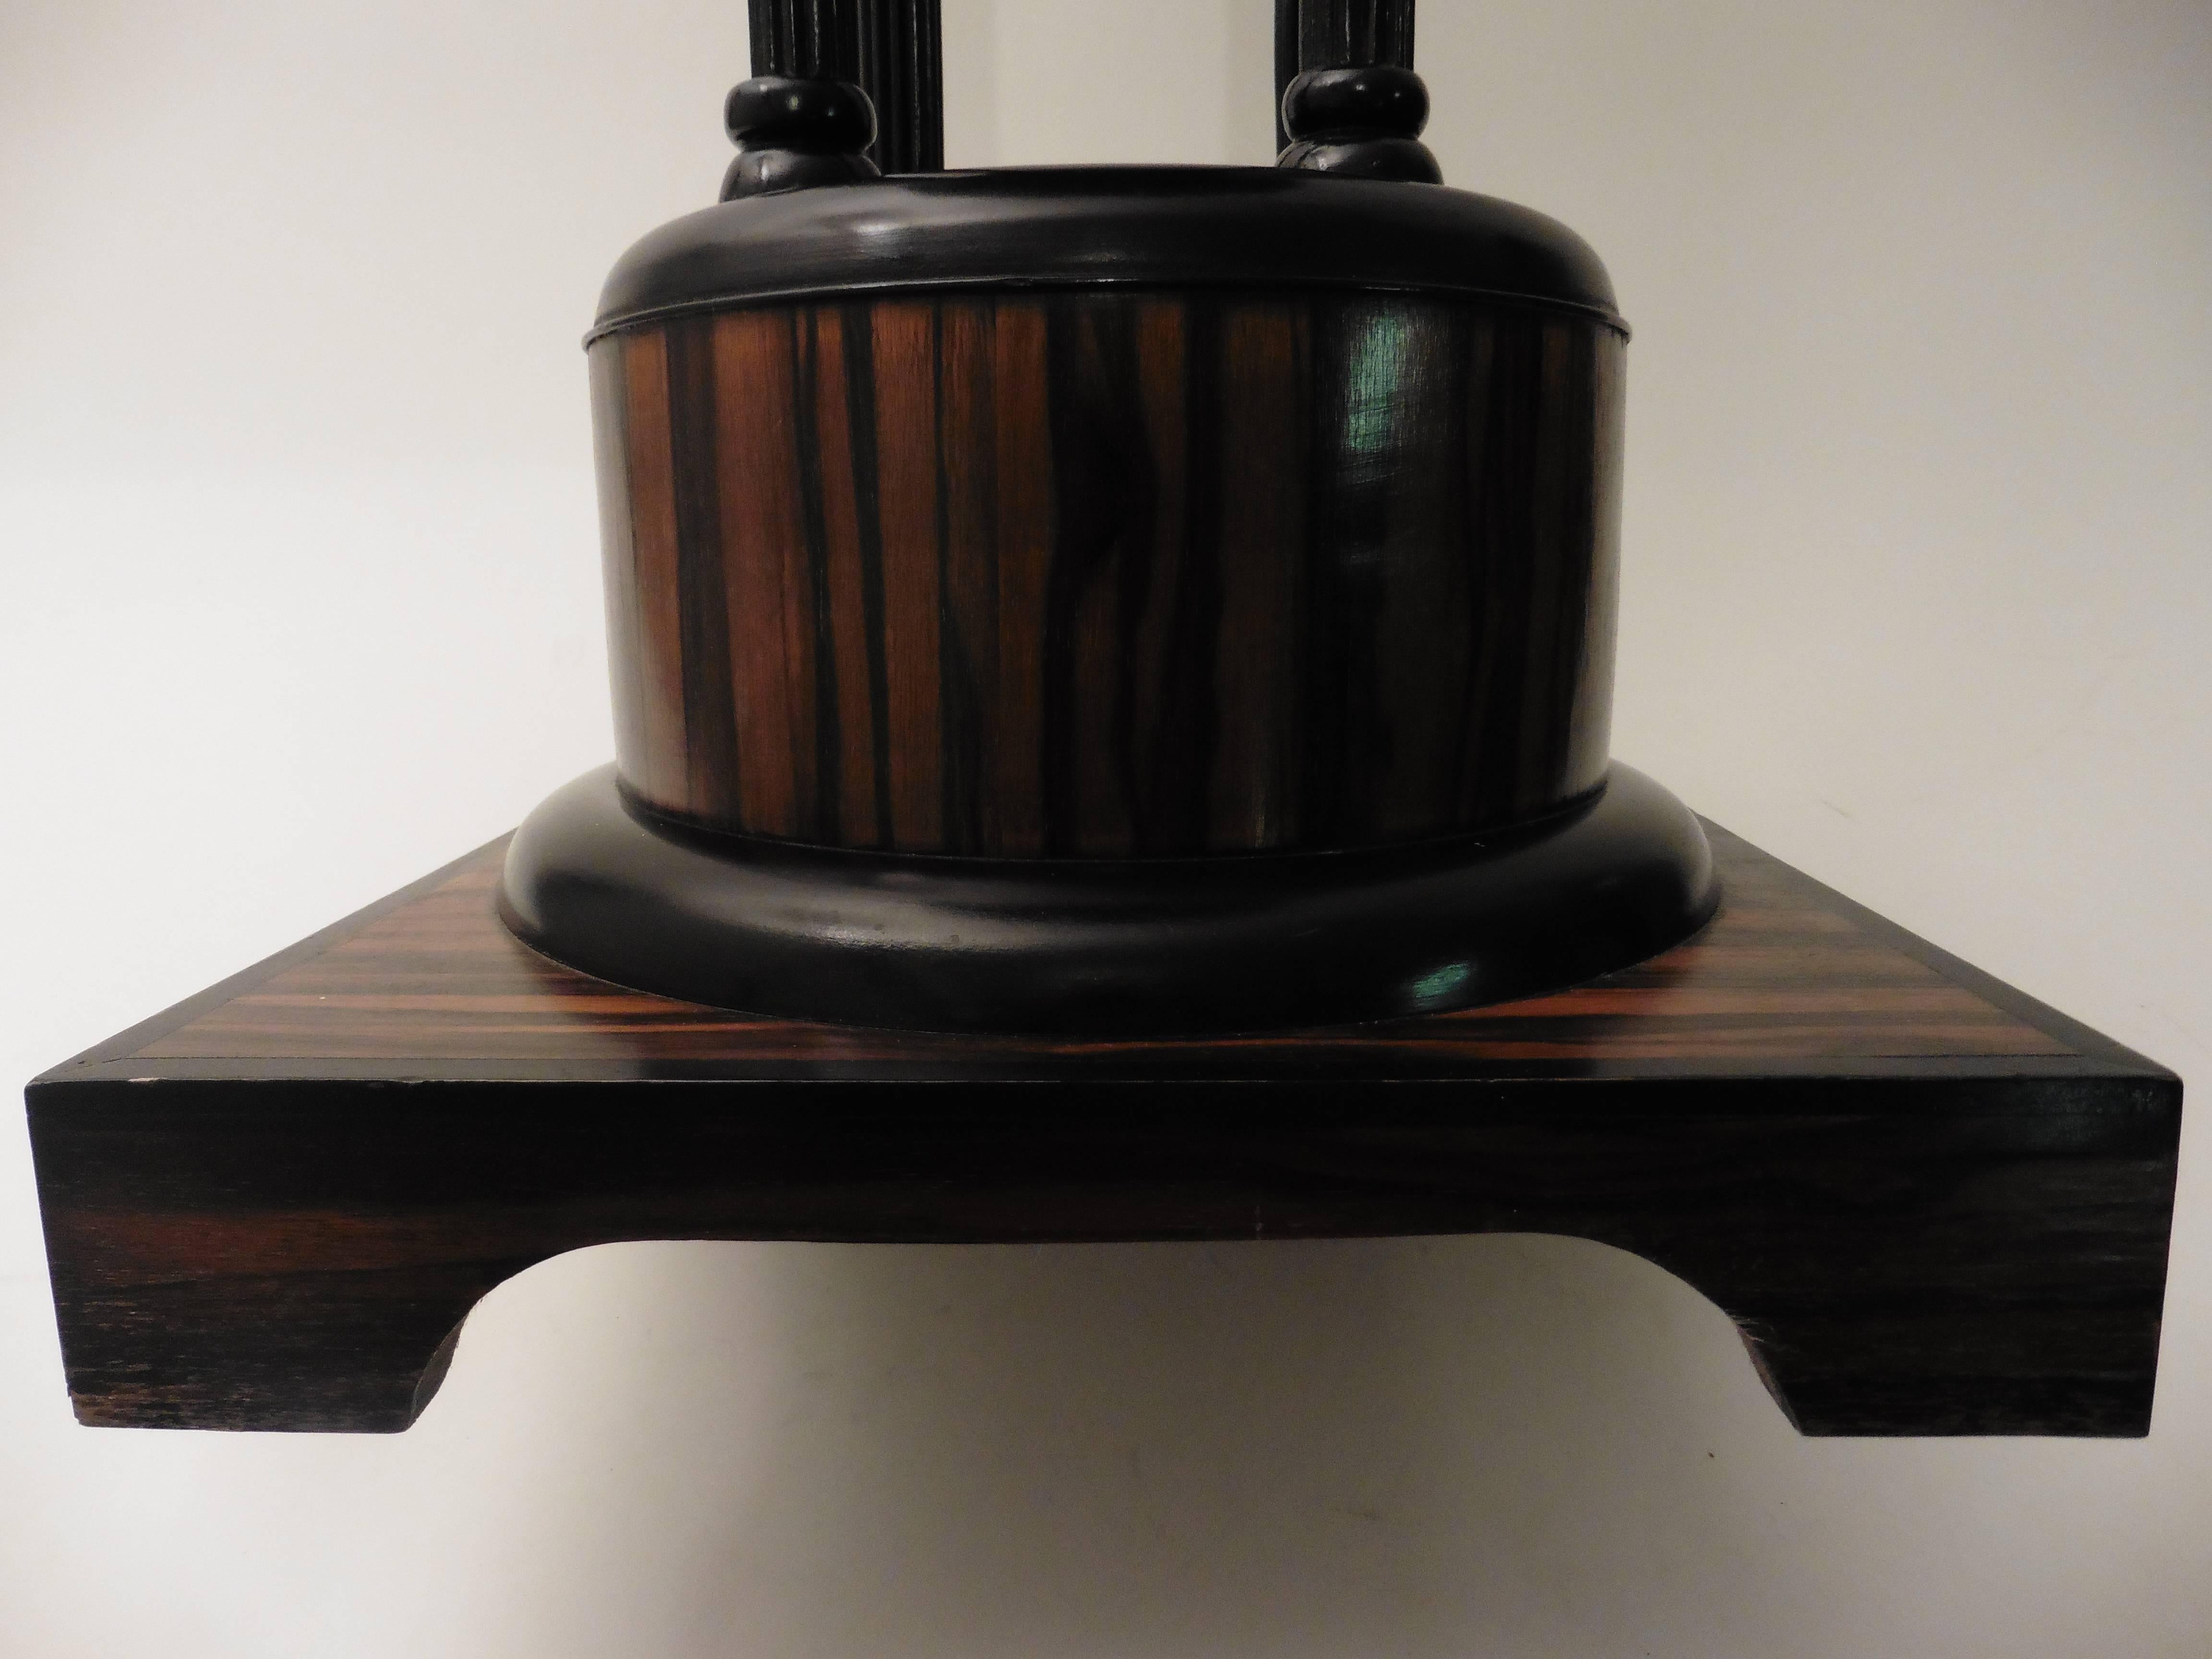 French Art Deco Macassar ebony wood table in the manner of Ruhlmann. The square base supports a round Macassar plinth, with an ebonized band. The main support is formed of four ebonized columns, finished with a simple octagonal table top, circa